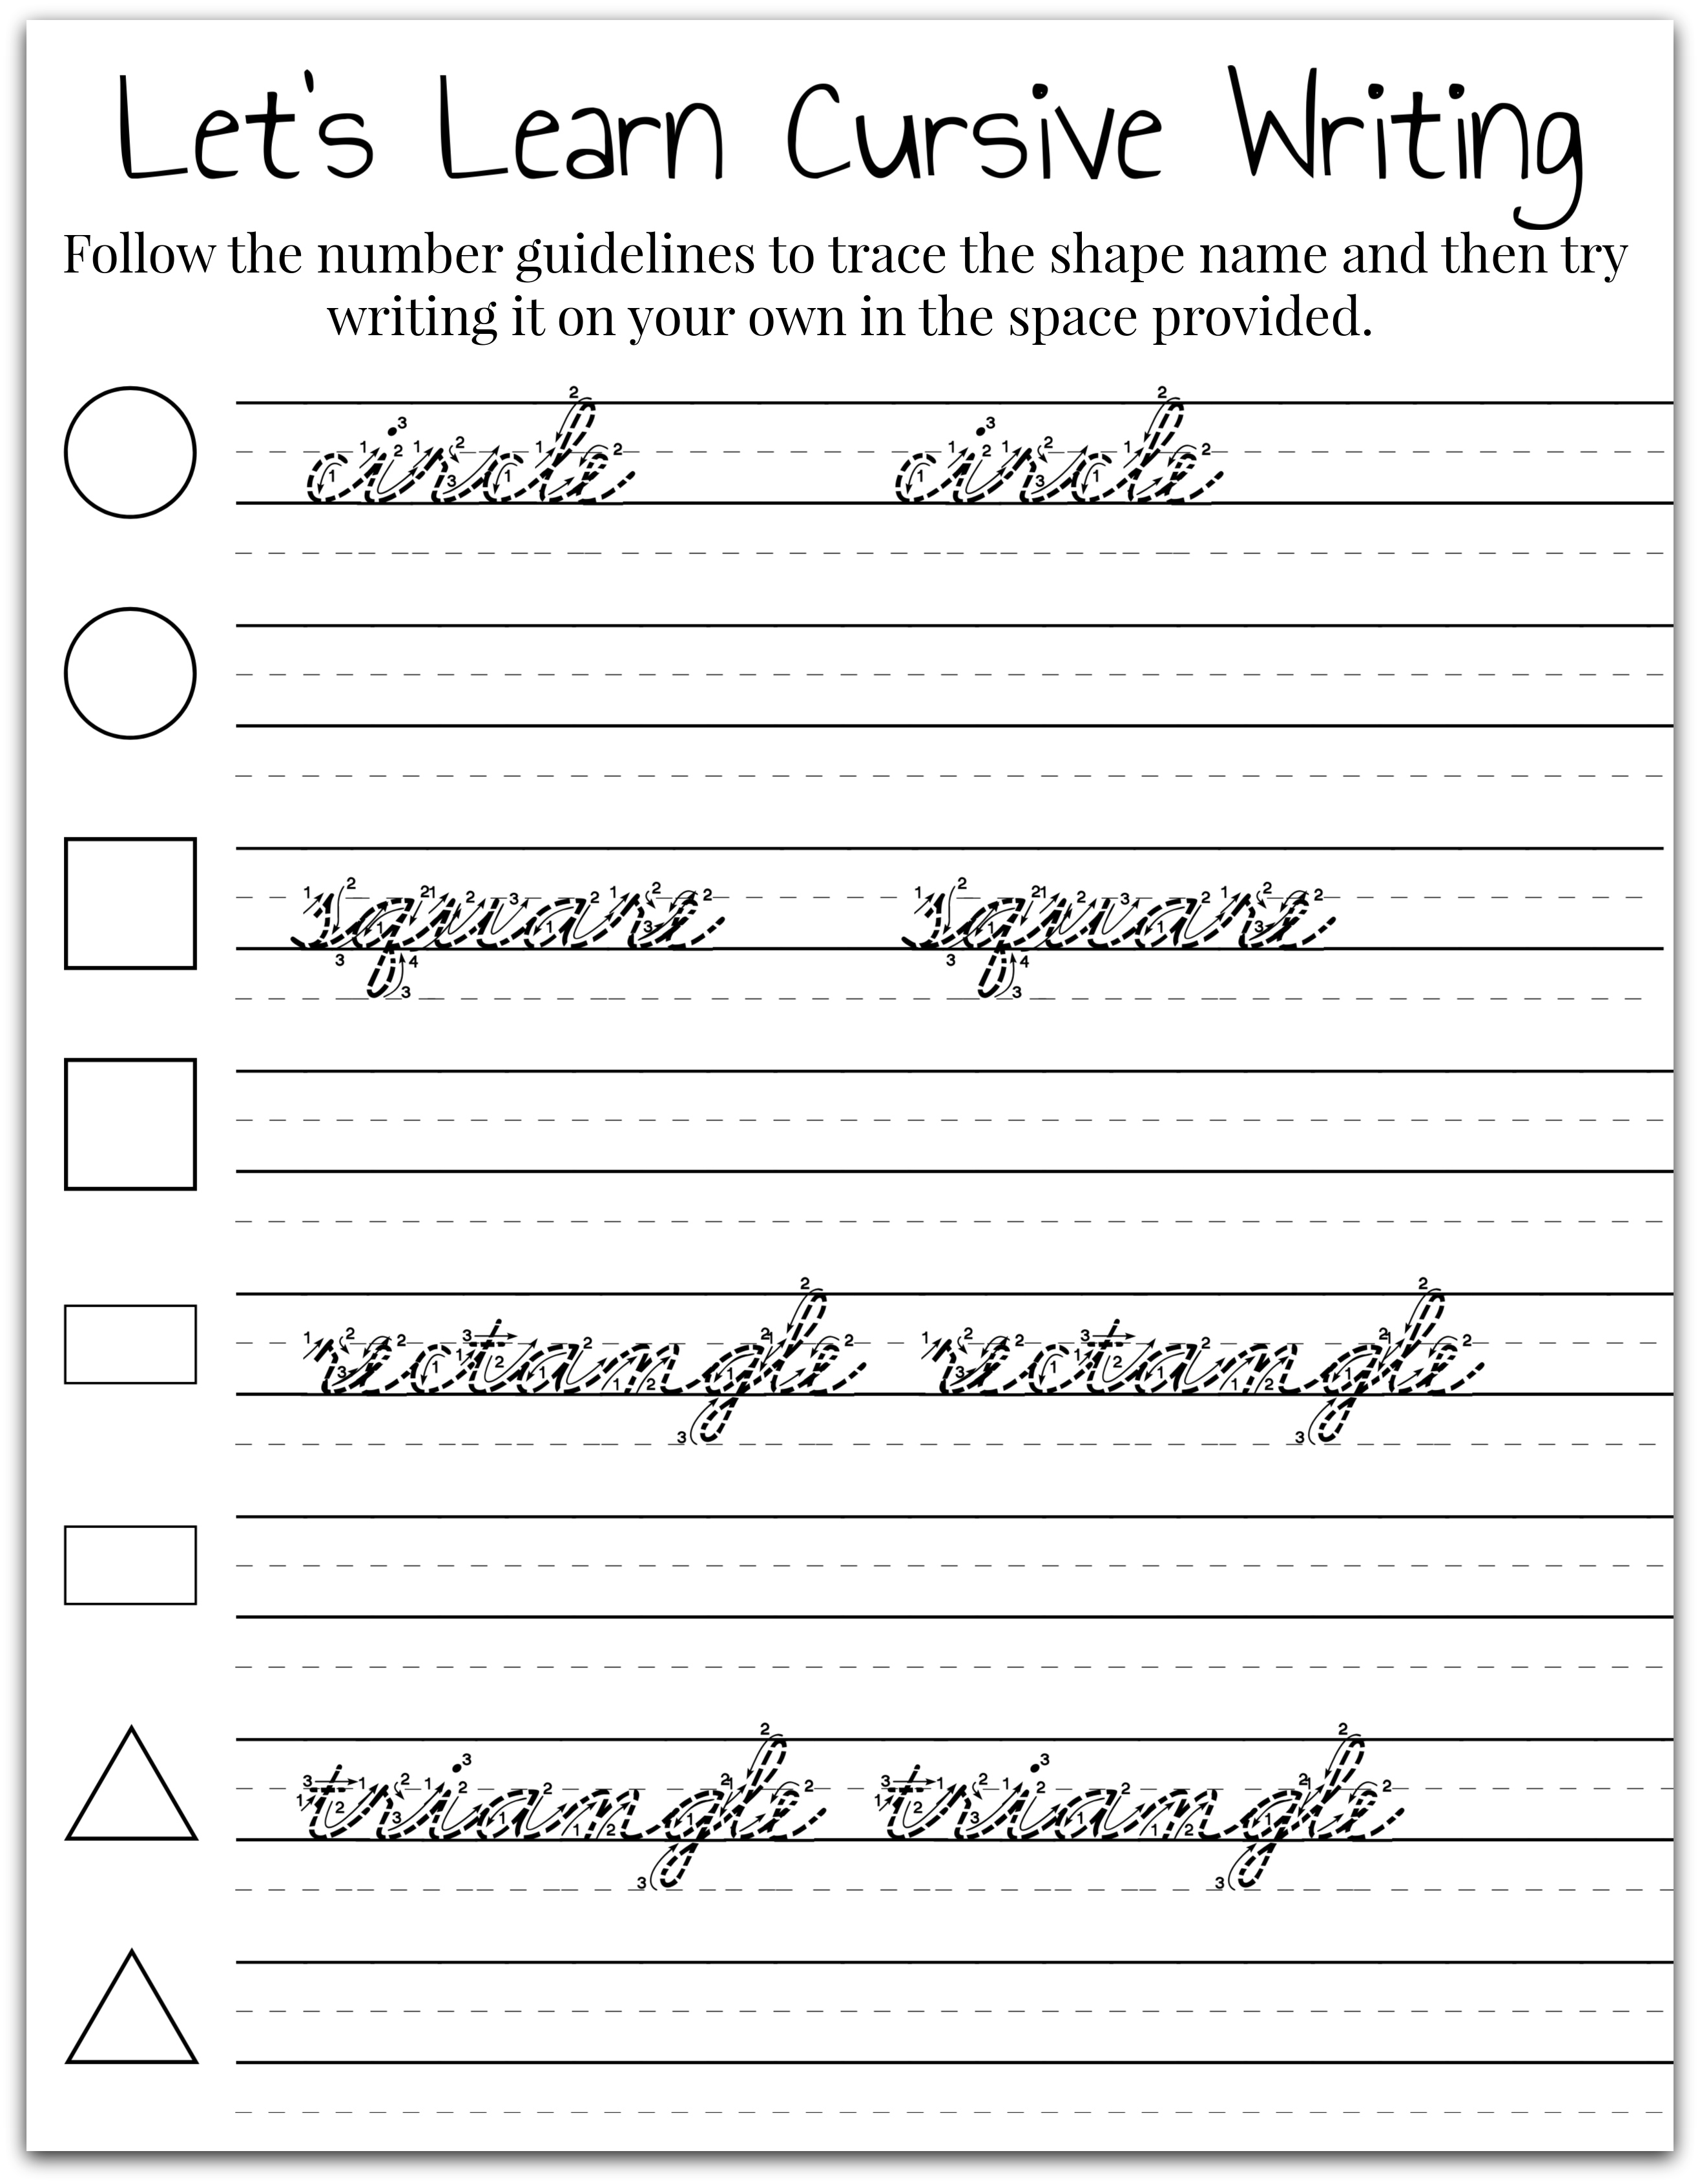 learning-cursive-writing-for-kids-extreme-couponing-mom